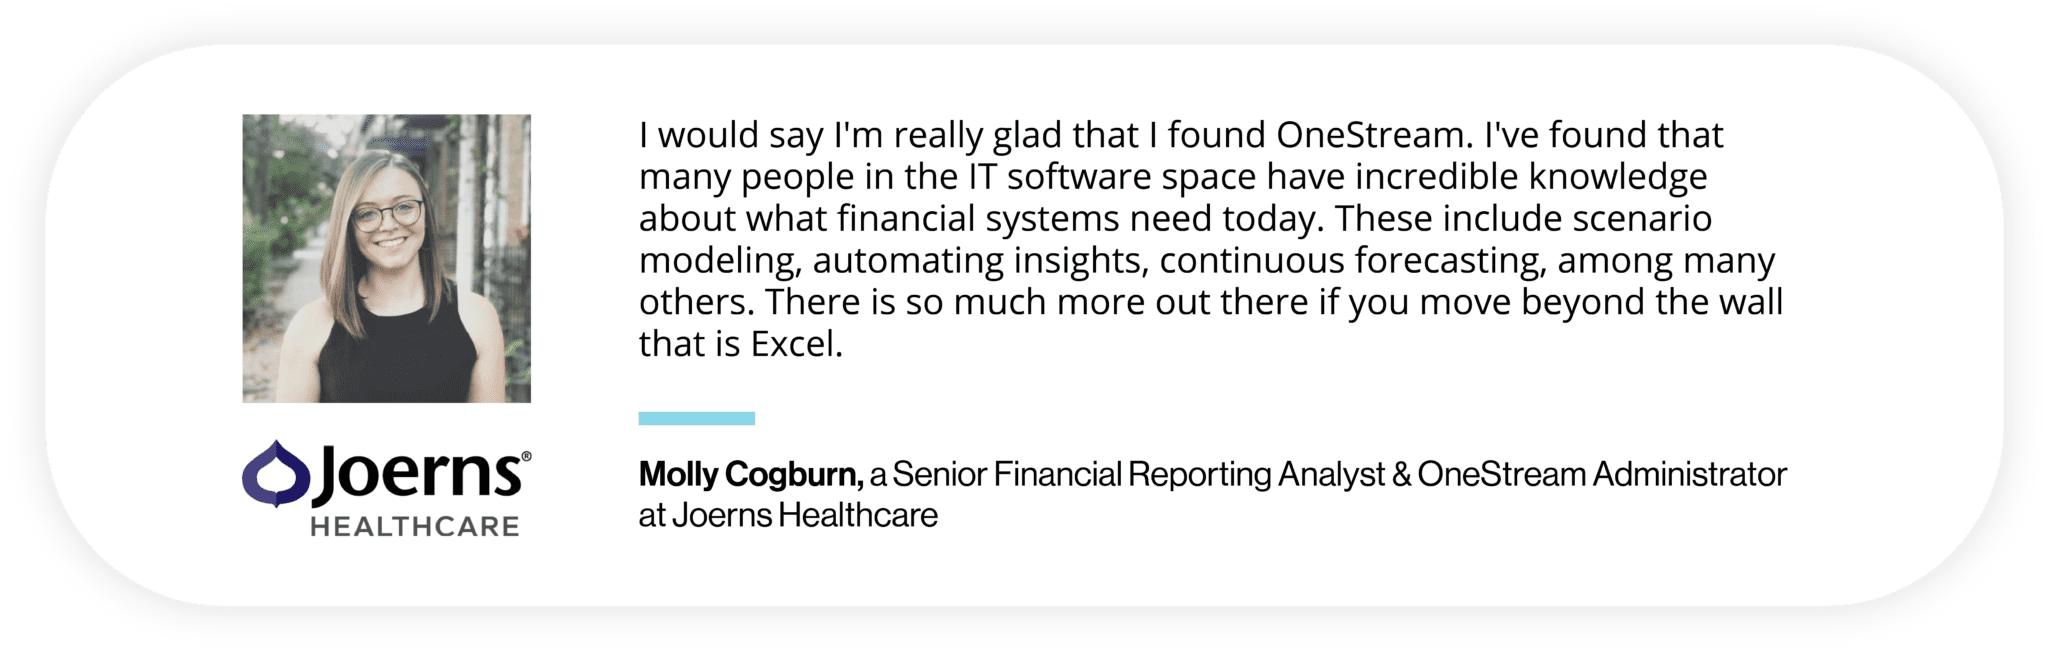 Molly Cogburn from Joerns Healthcare comments on OneStream